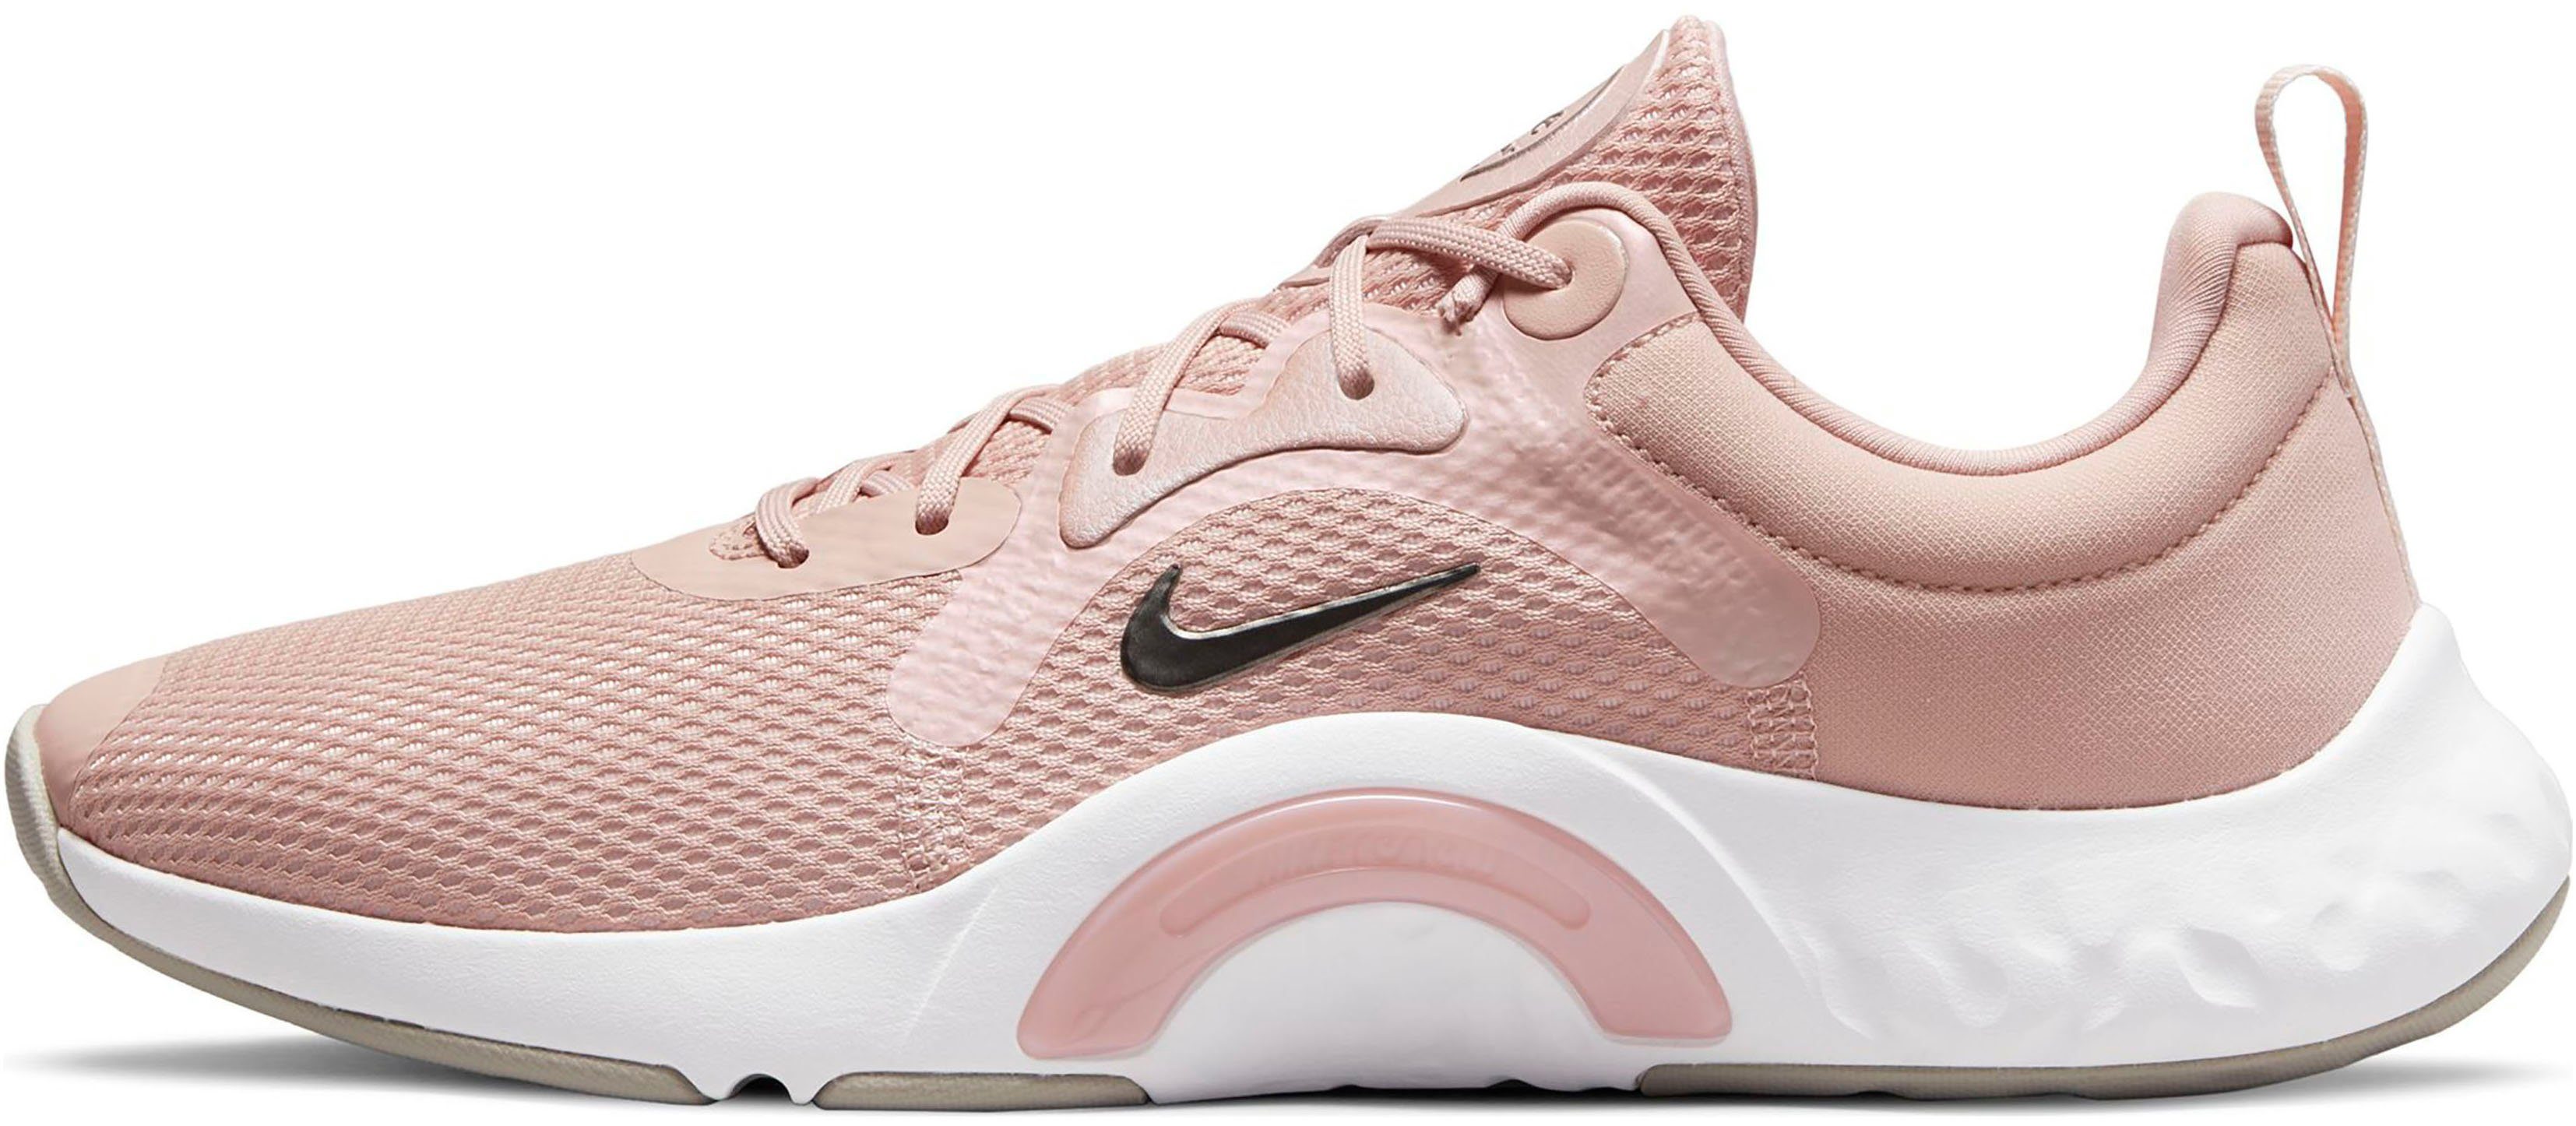 Nike RENEW PINK-OXFORD-MTLC-PEWTER-PALE-CORAL-WHITE 11 Fitnessschuh IN-SEASON TR